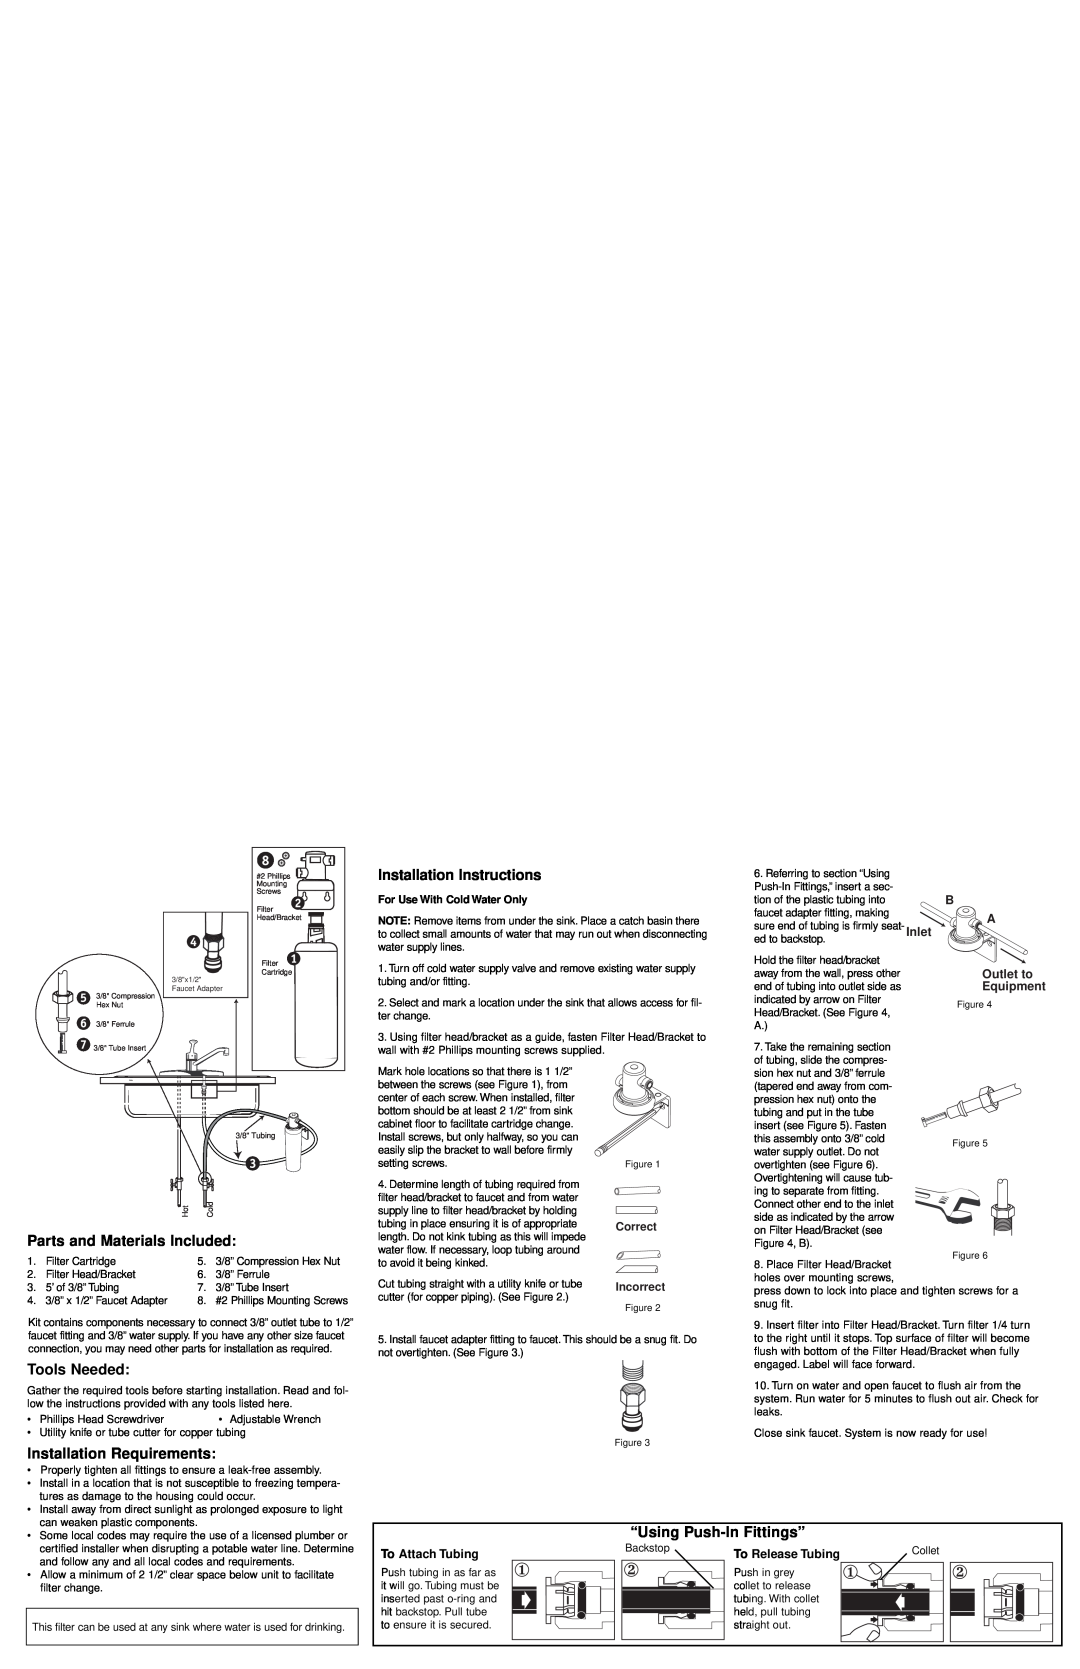 Whirlpool WHCF-SUFC Installation Instructions, Tools Needed, Installation Requirements, “Using Push-InFittings” 